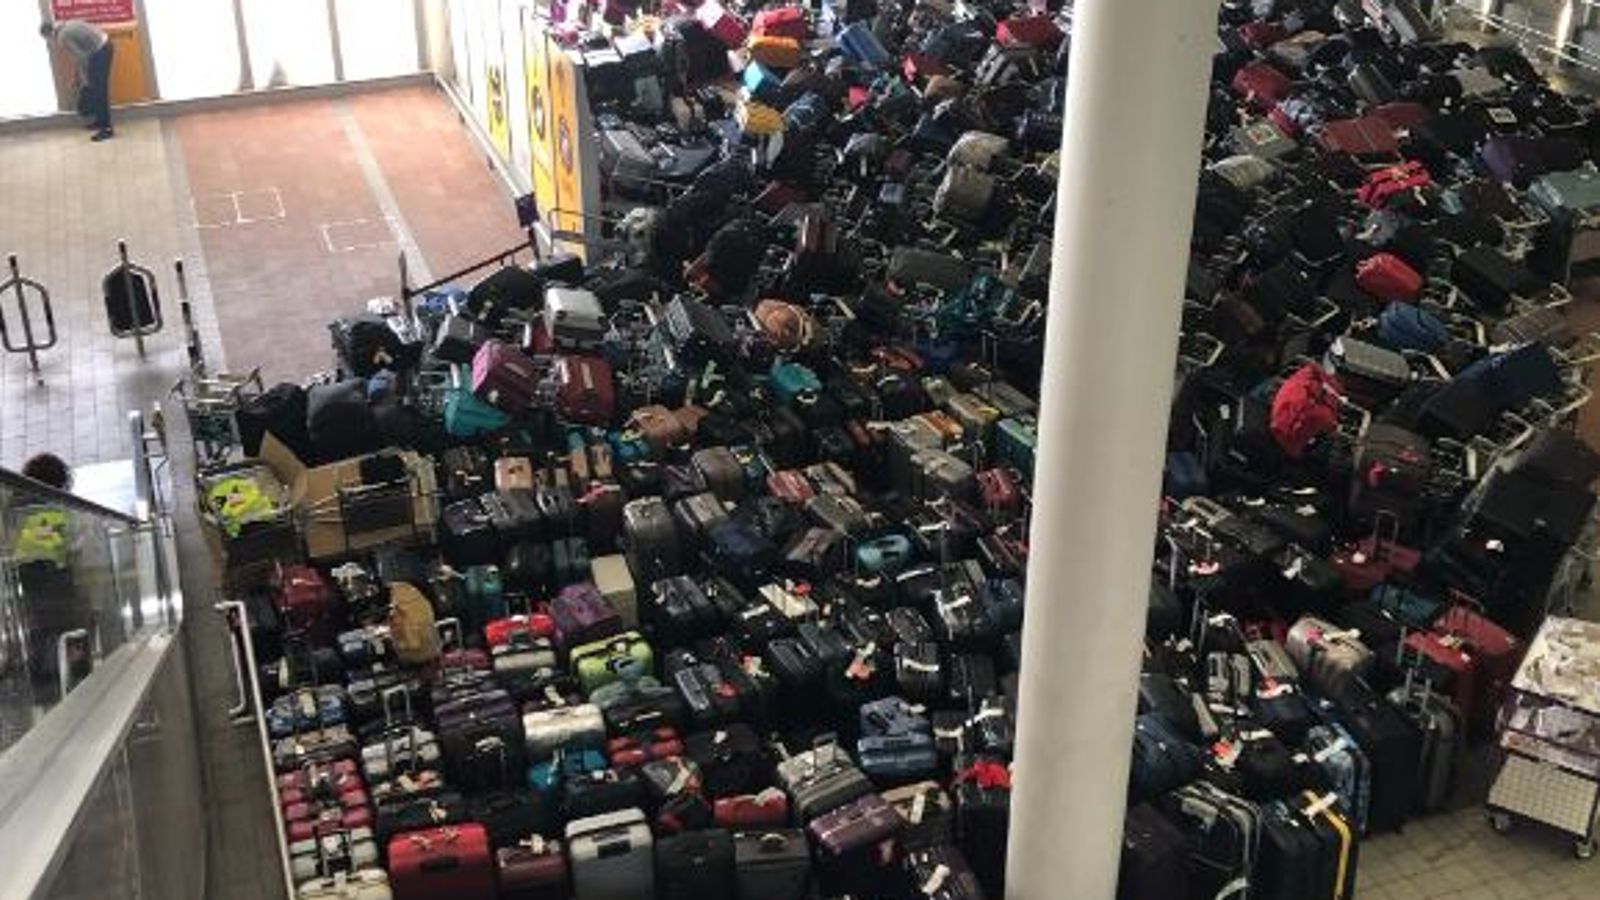 Enormous luggage carpet' at Heathrow terminal after 'issue with baggage  system' | UK News | Sky News